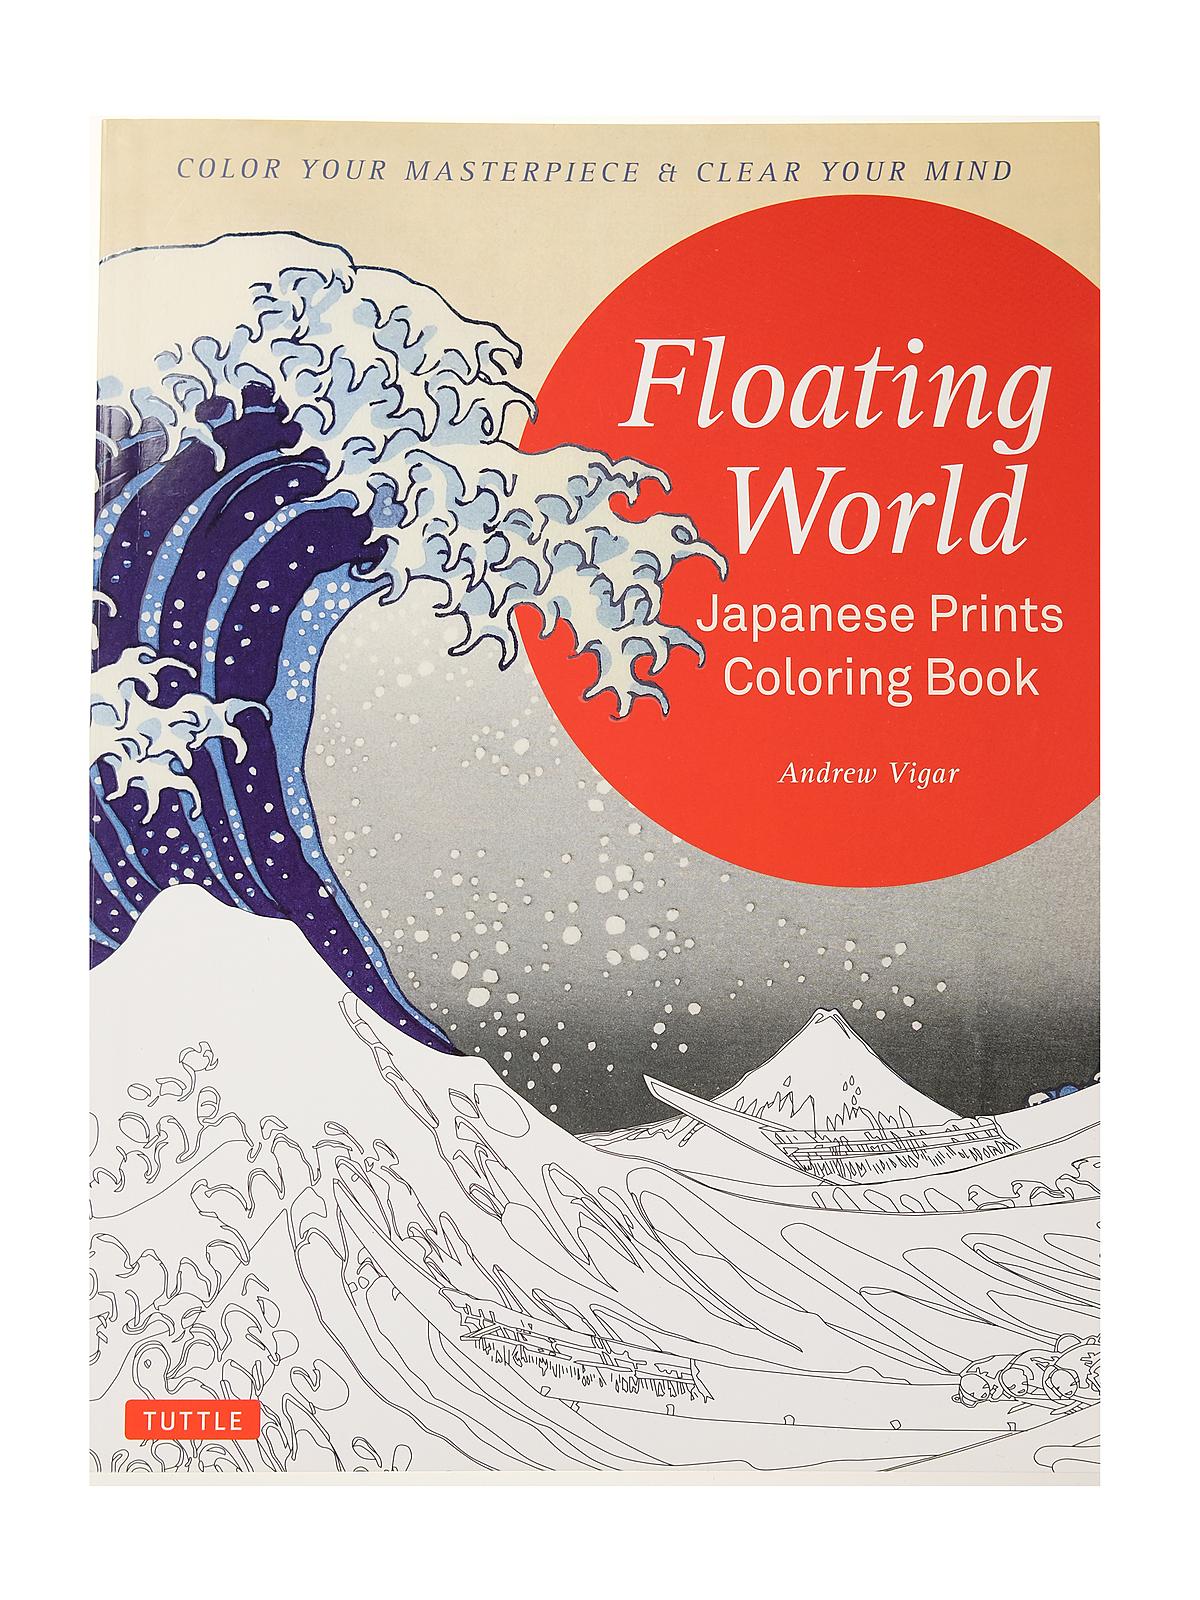 Floating World Japanese Prints Coloring Book Each